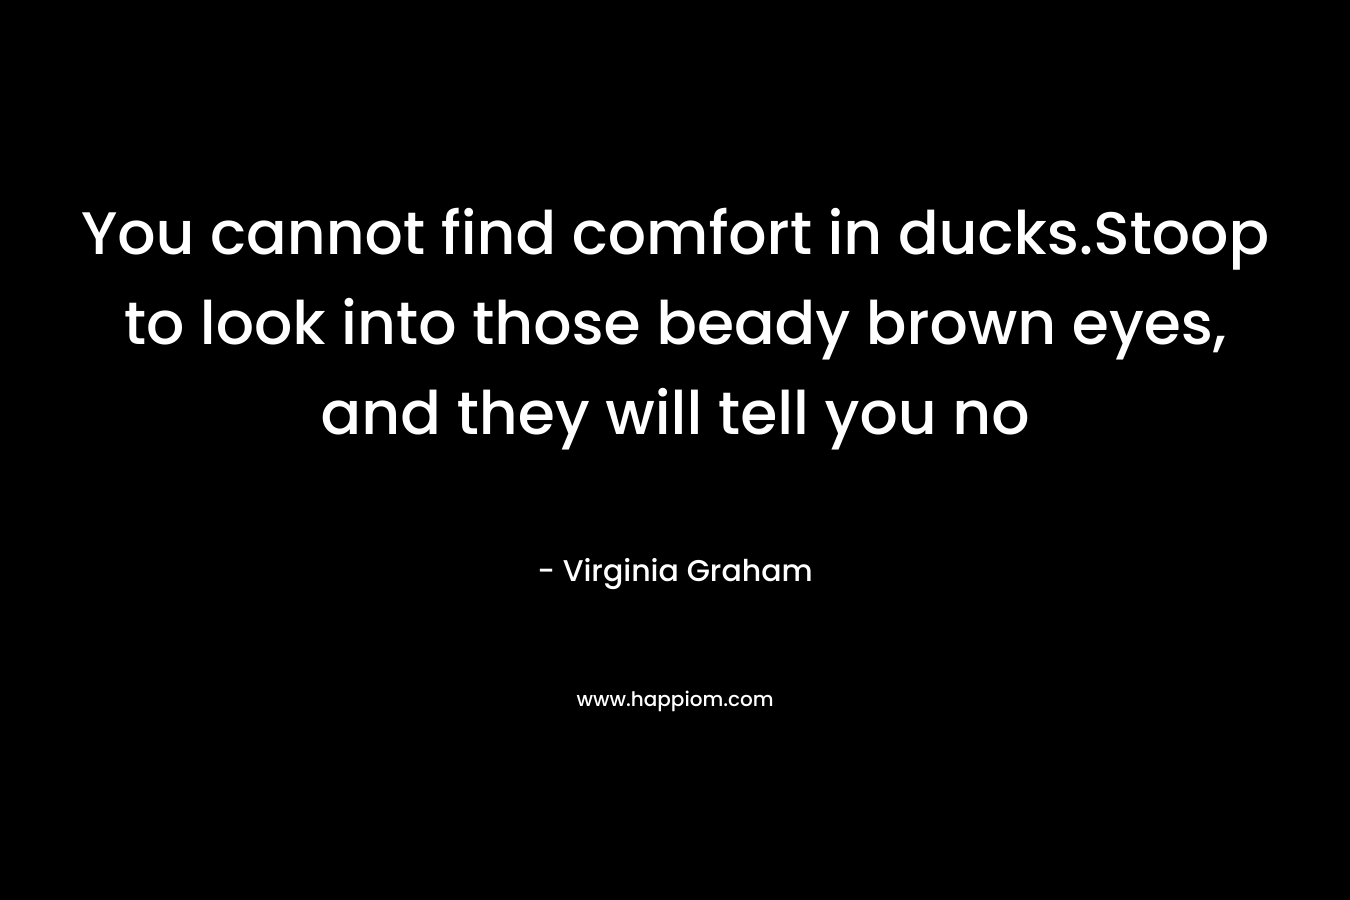 You cannot find comfort in ducks.Stoop to look into those beady brown eyes, and they will tell you no – Virginia Graham